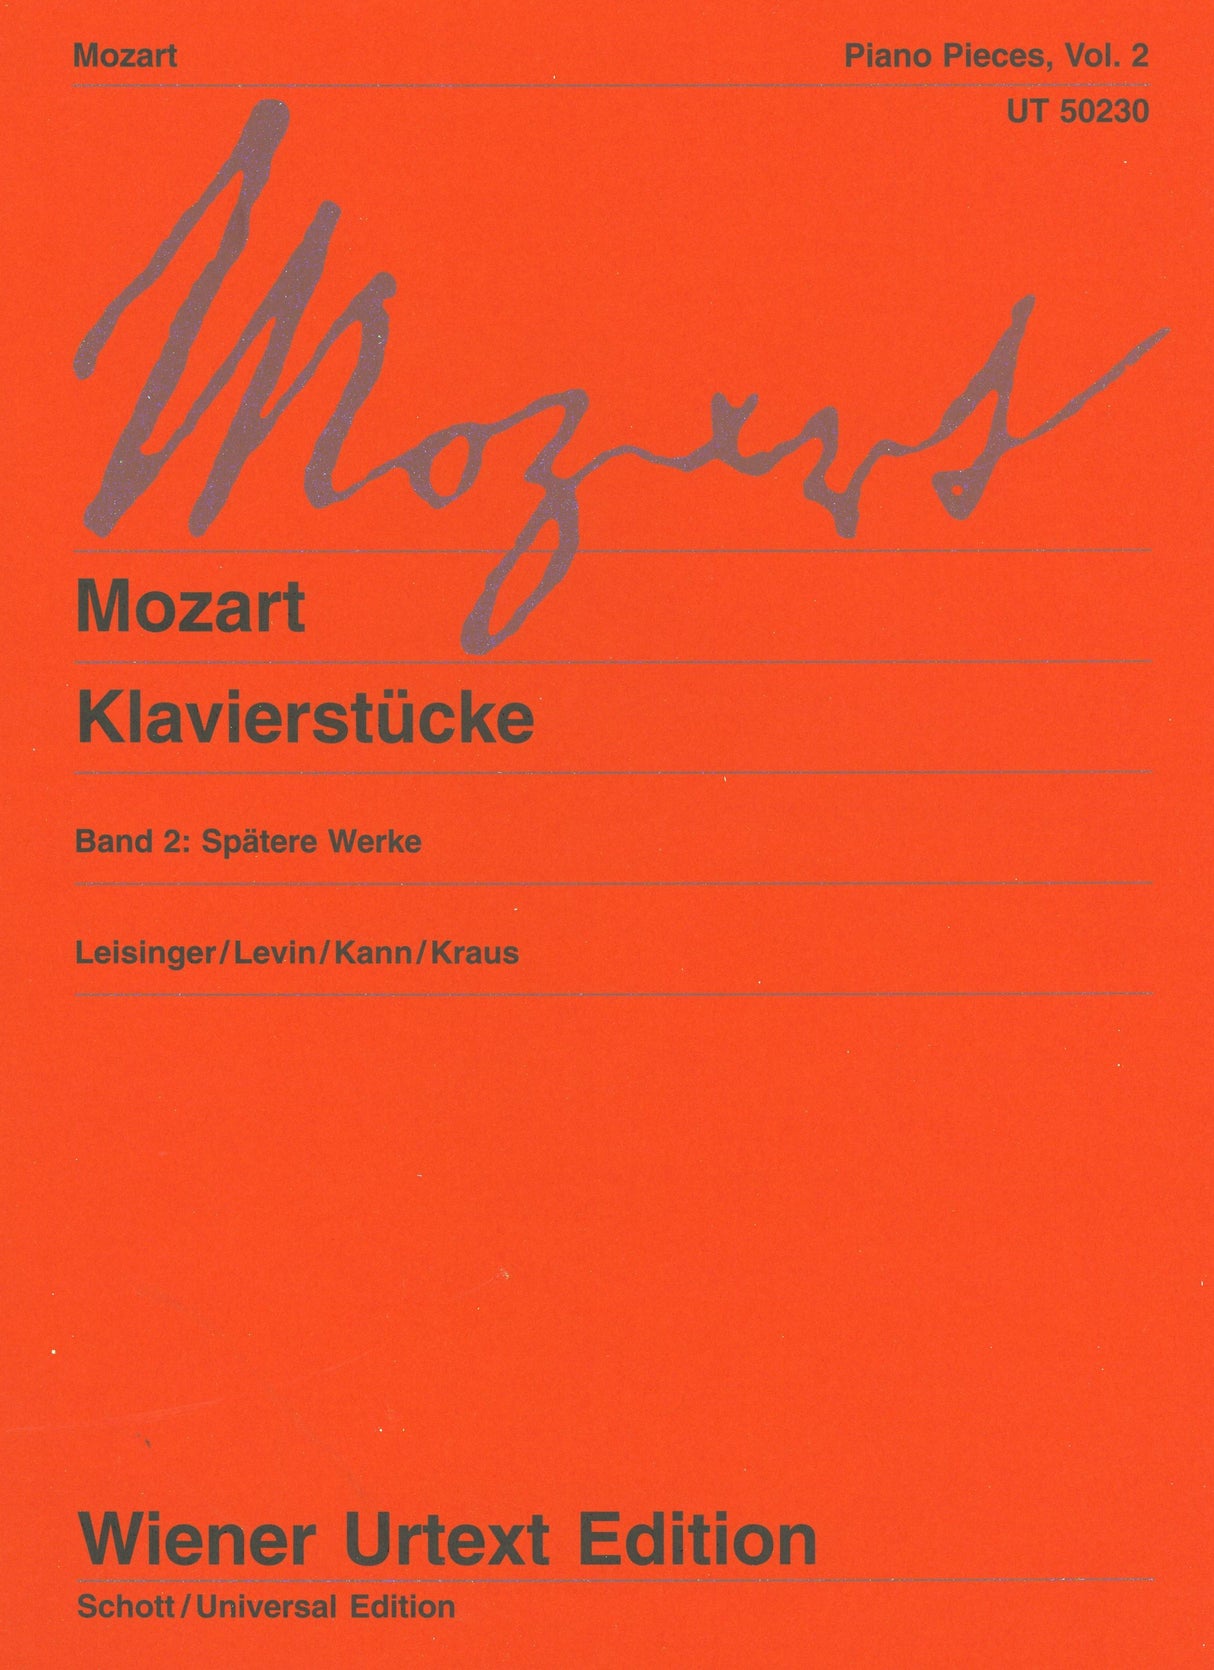 Mozart: Piano Pieces - Volume 2 (Later Works)